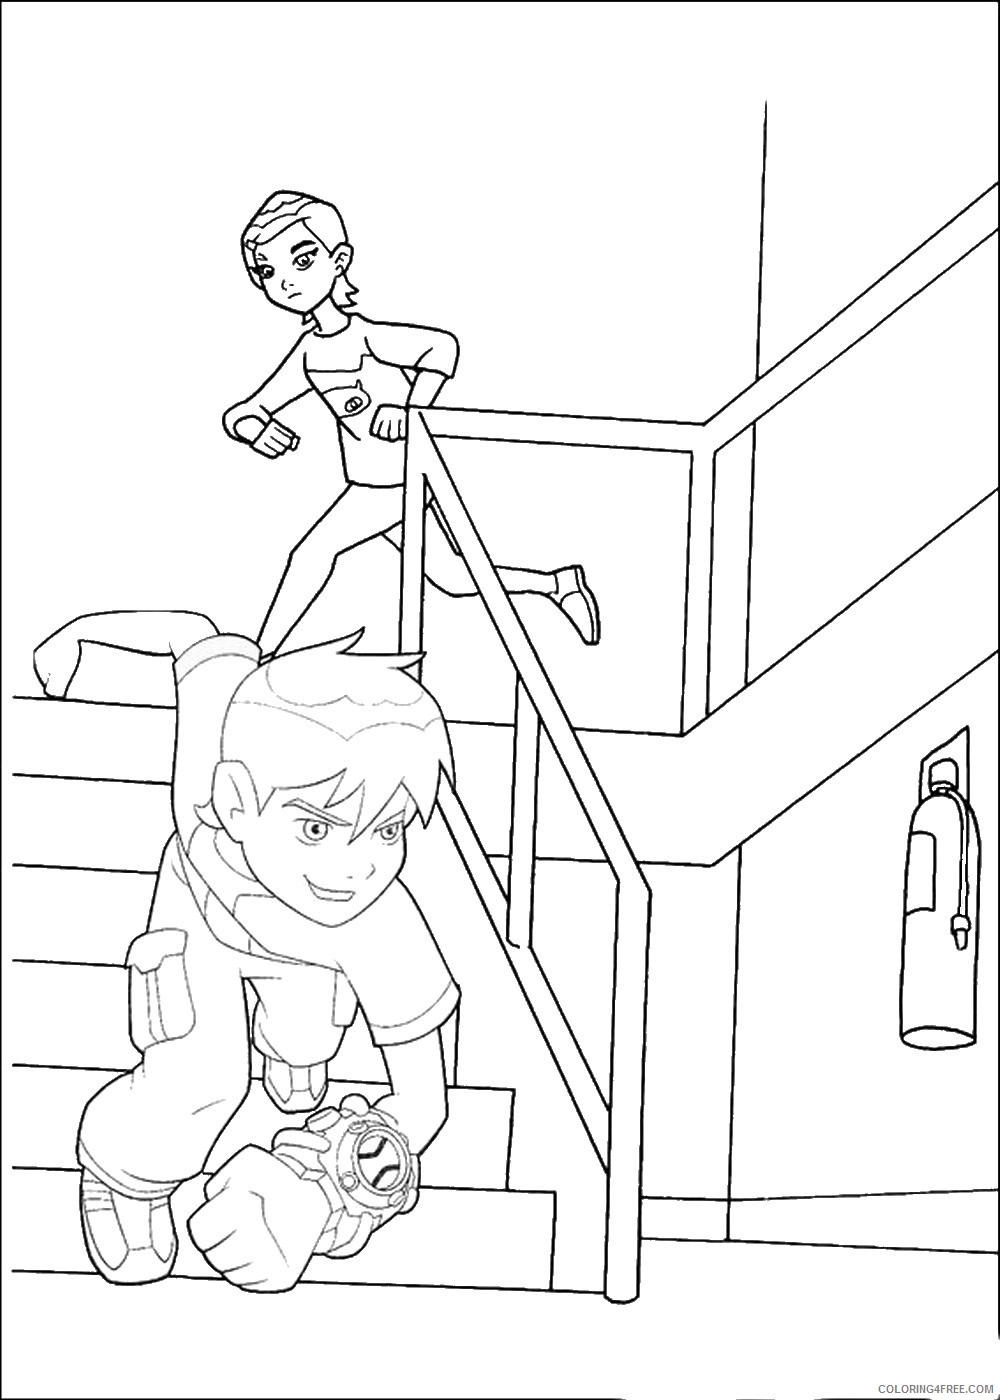 Ben 10 Coloring Pages Cartoons ben10 50 Printable 2020 1227 Coloring4free